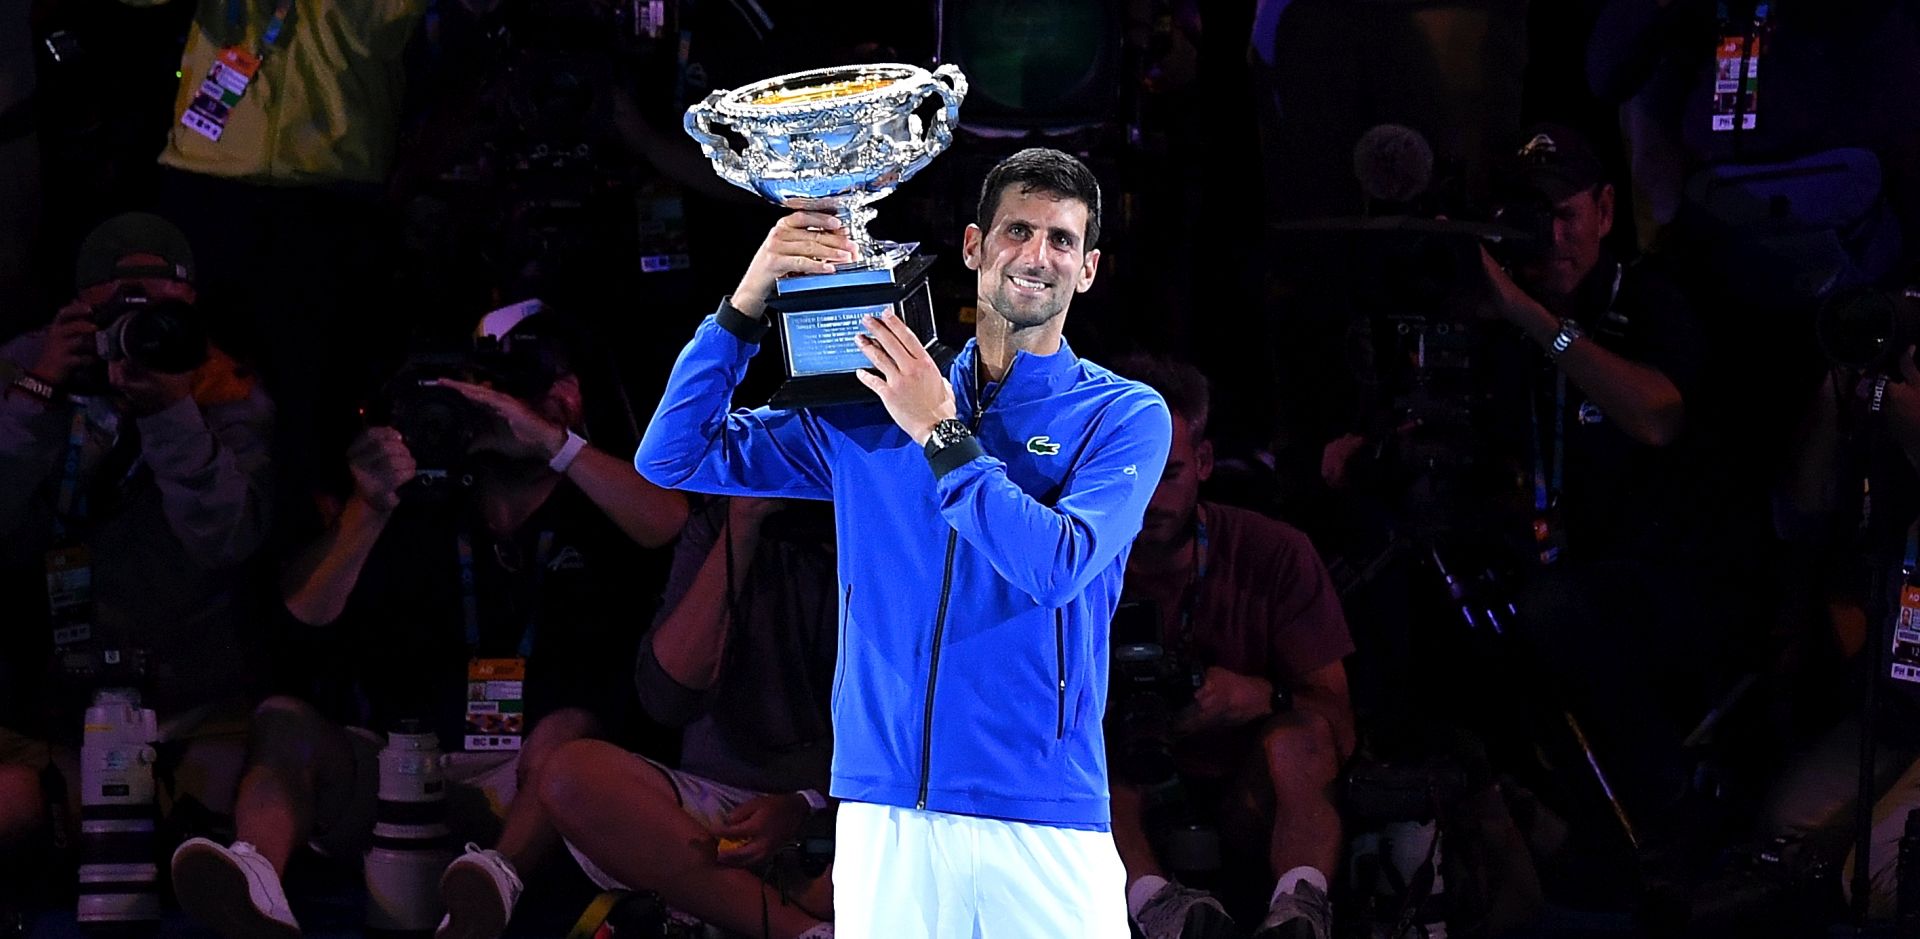 epa07324168 Novak Djokovic of Serbia raises the trophy after winning his men's singles final match against Rafael Nadal of Spain at the Australian Open Grand Slam tennis tournament in Melbourne, Australia, 27 January 2019.  EPA/ERIK ANDERSON EDITORIAL USE ONLY AUSTRALIA AND NEW ZEALAND OUT